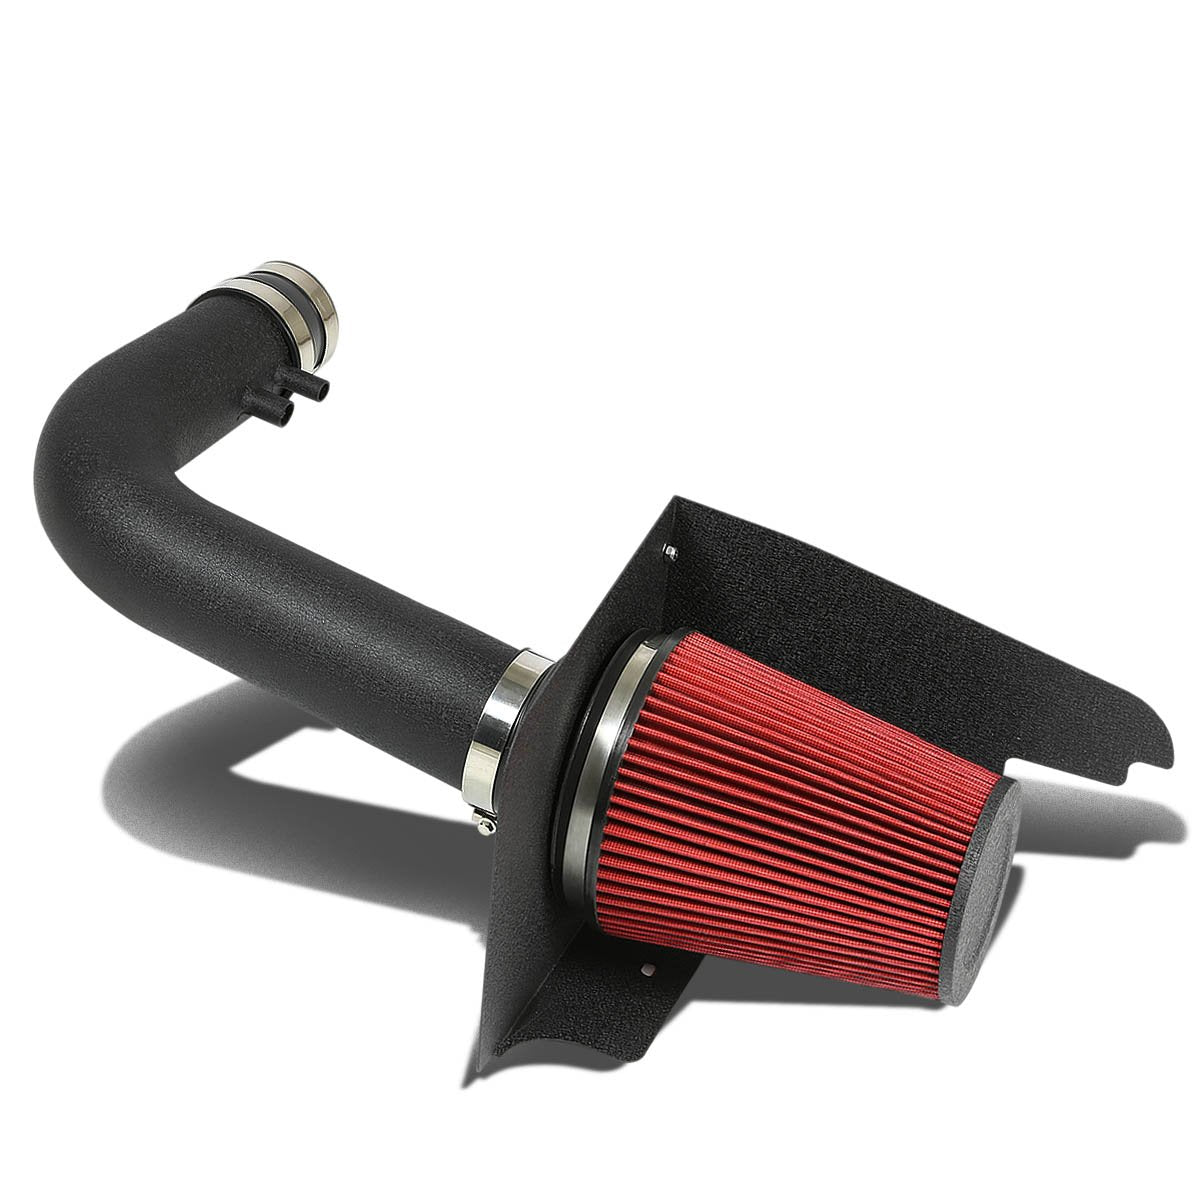 97-03 Ford F150 Expedition 4.6L 5.4L Aluminum Cold Air Intake w/Heat Shield+Filter - Black